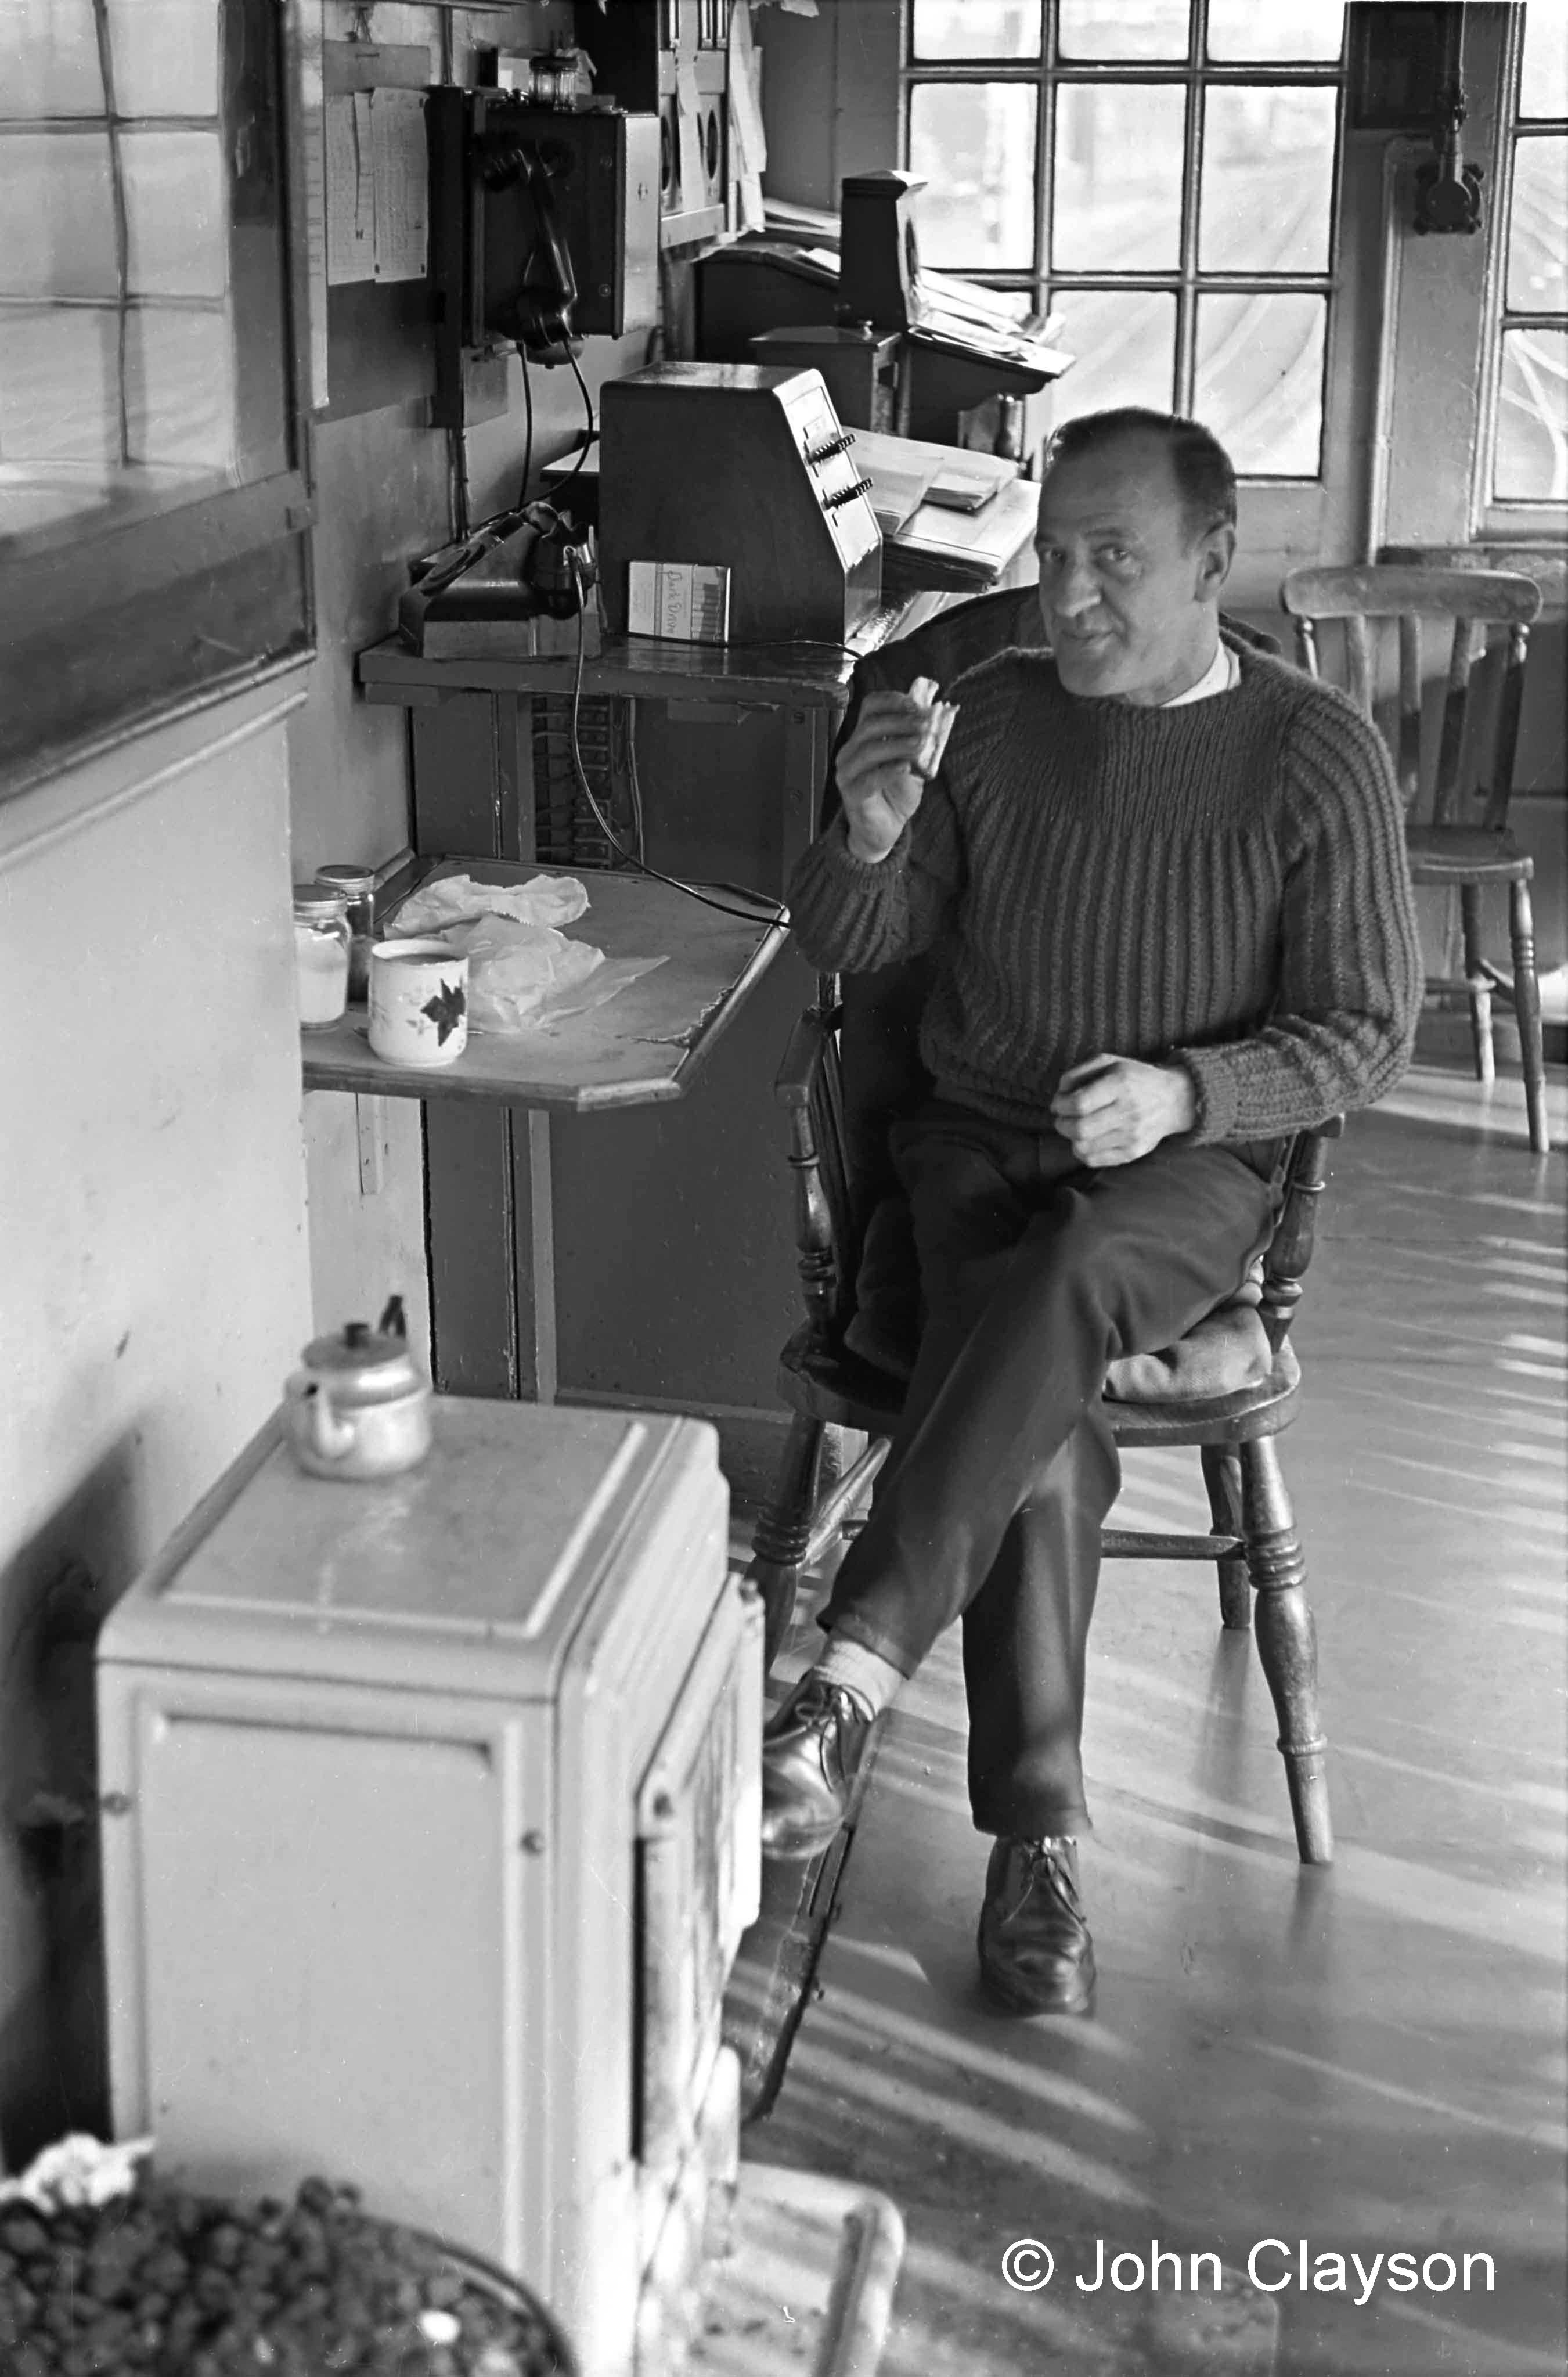 The signalman whose 'afternoon tea' we've interrupted is Jock Drummond. The lever frame is out of shot on the right – the shadows of the levers can be seen across the floor. Photograph taken on 16th April 1964 by Cedric A. Clayson.